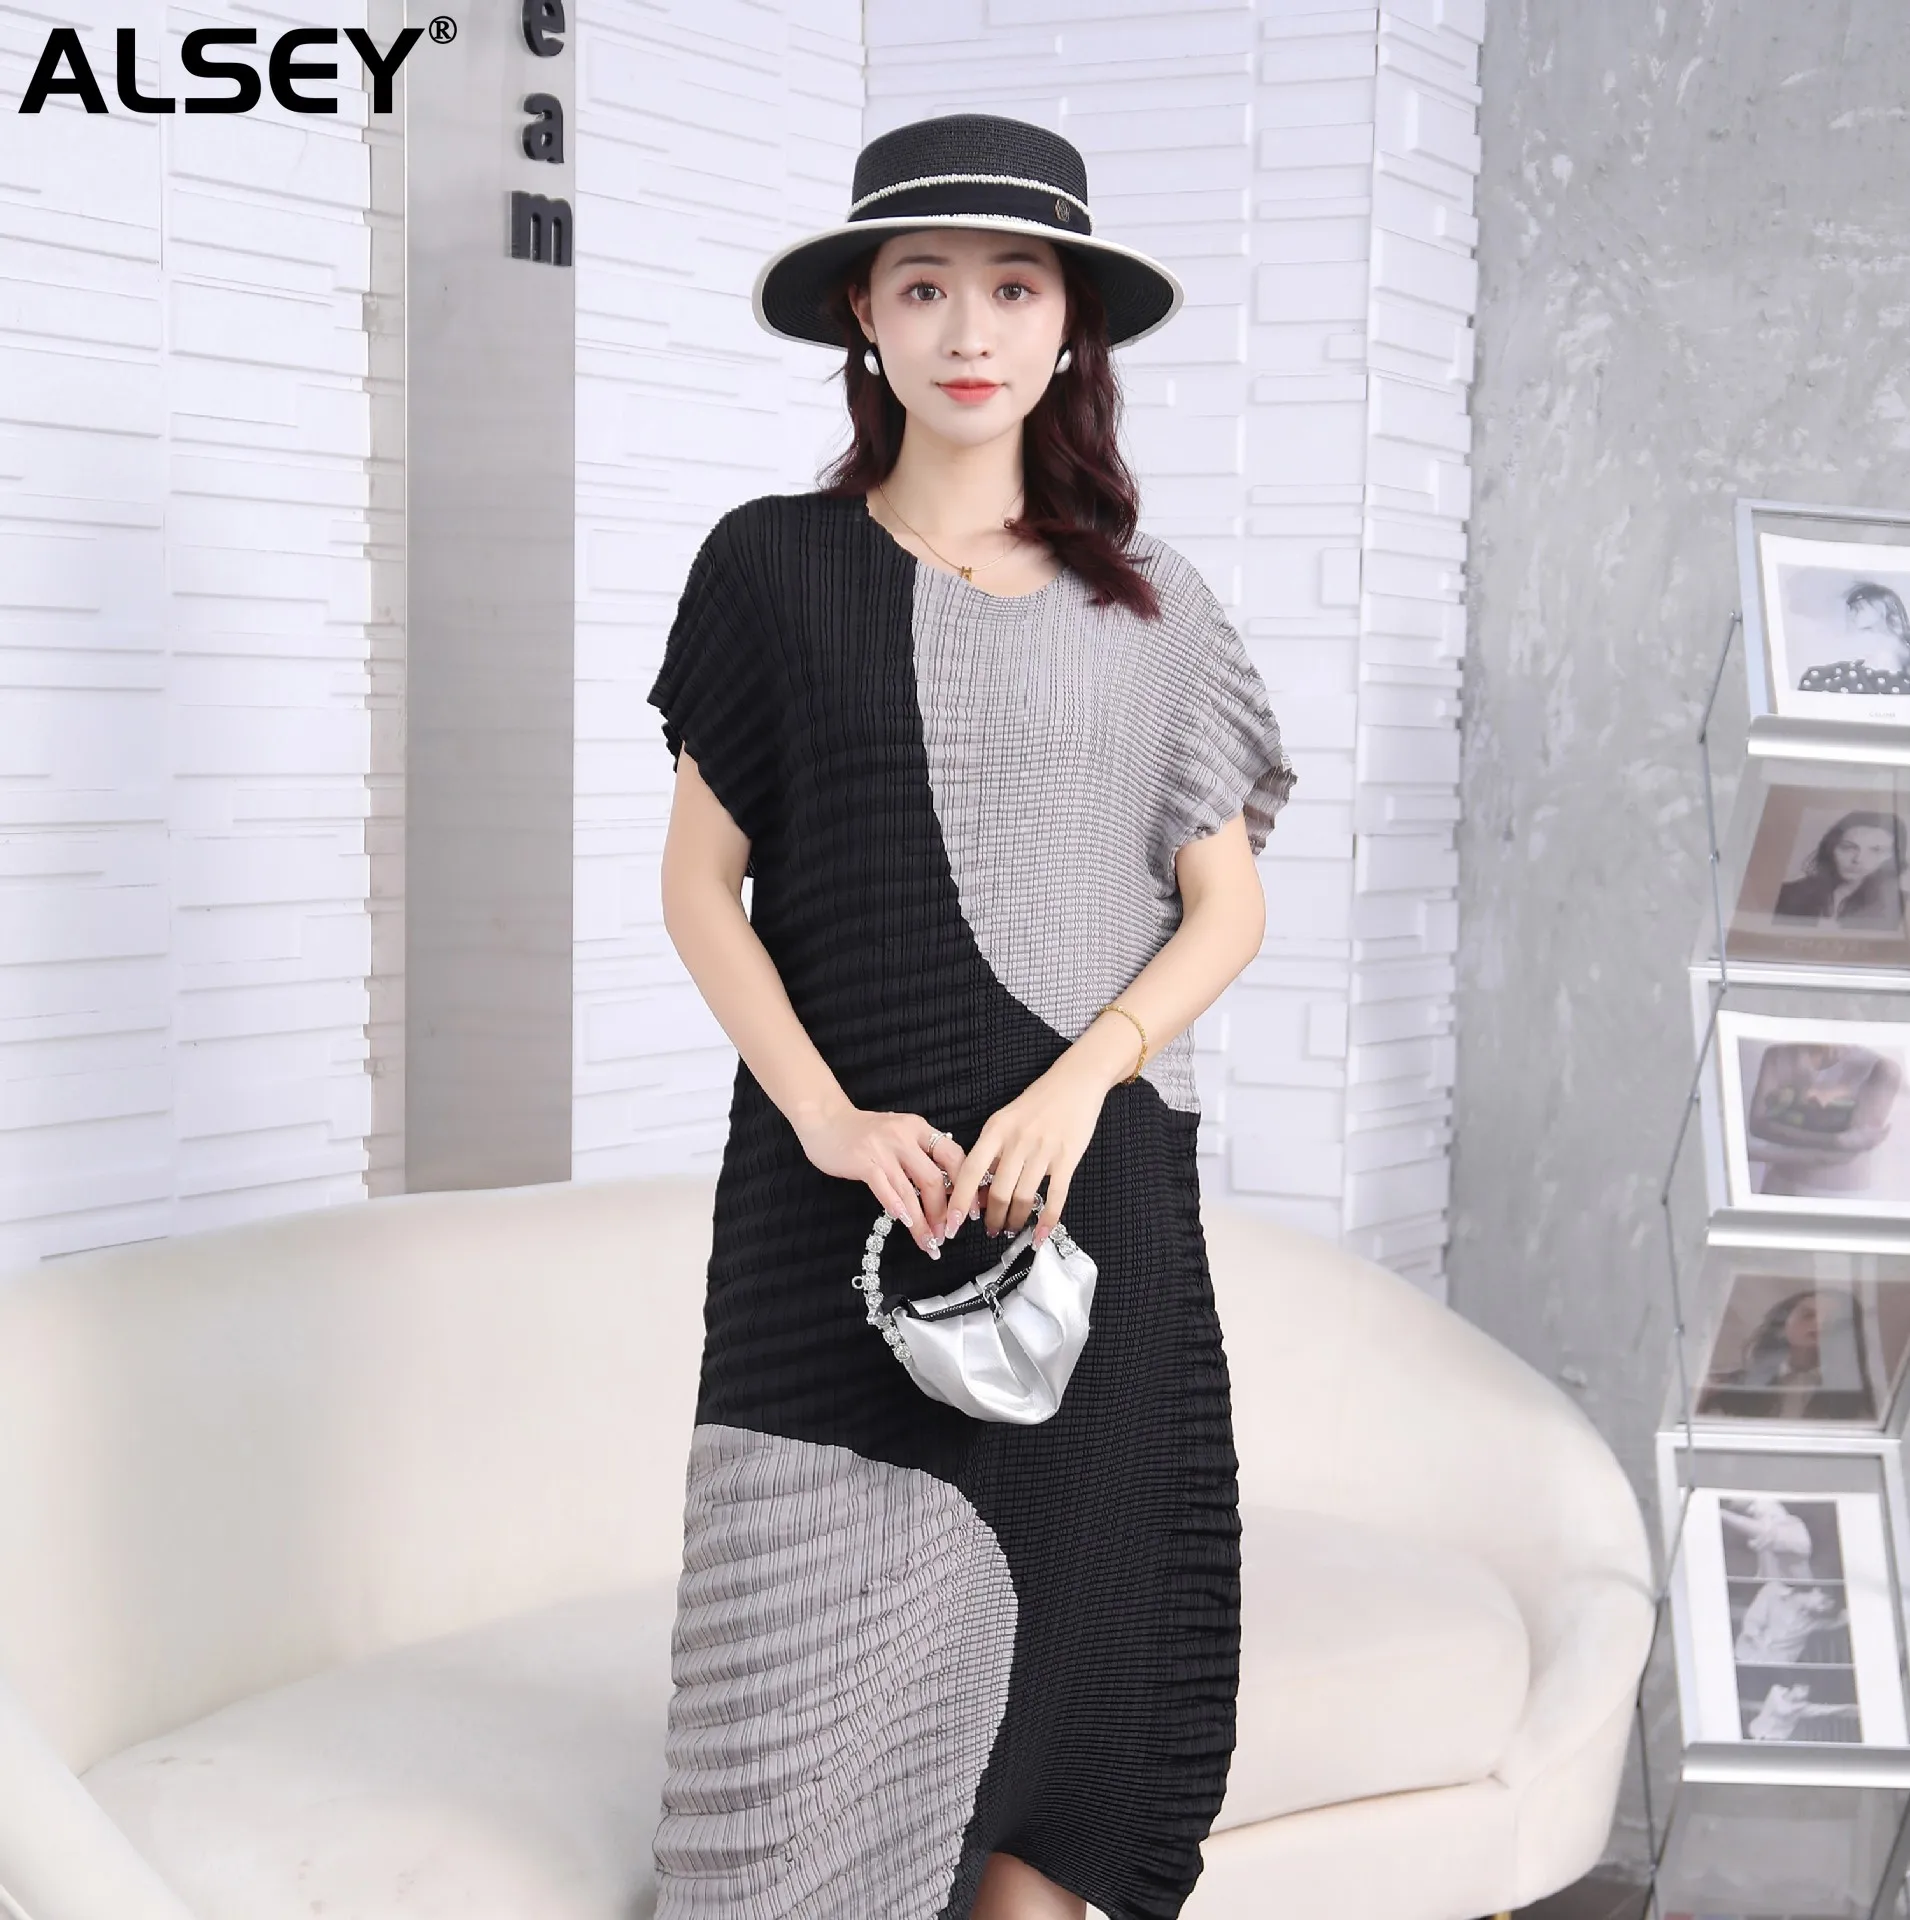 

Alsey 2023 Summer New Women's Fashion Collision Color Miyake Pleats Slim Temperament Loose Hundred with Women's Dresses